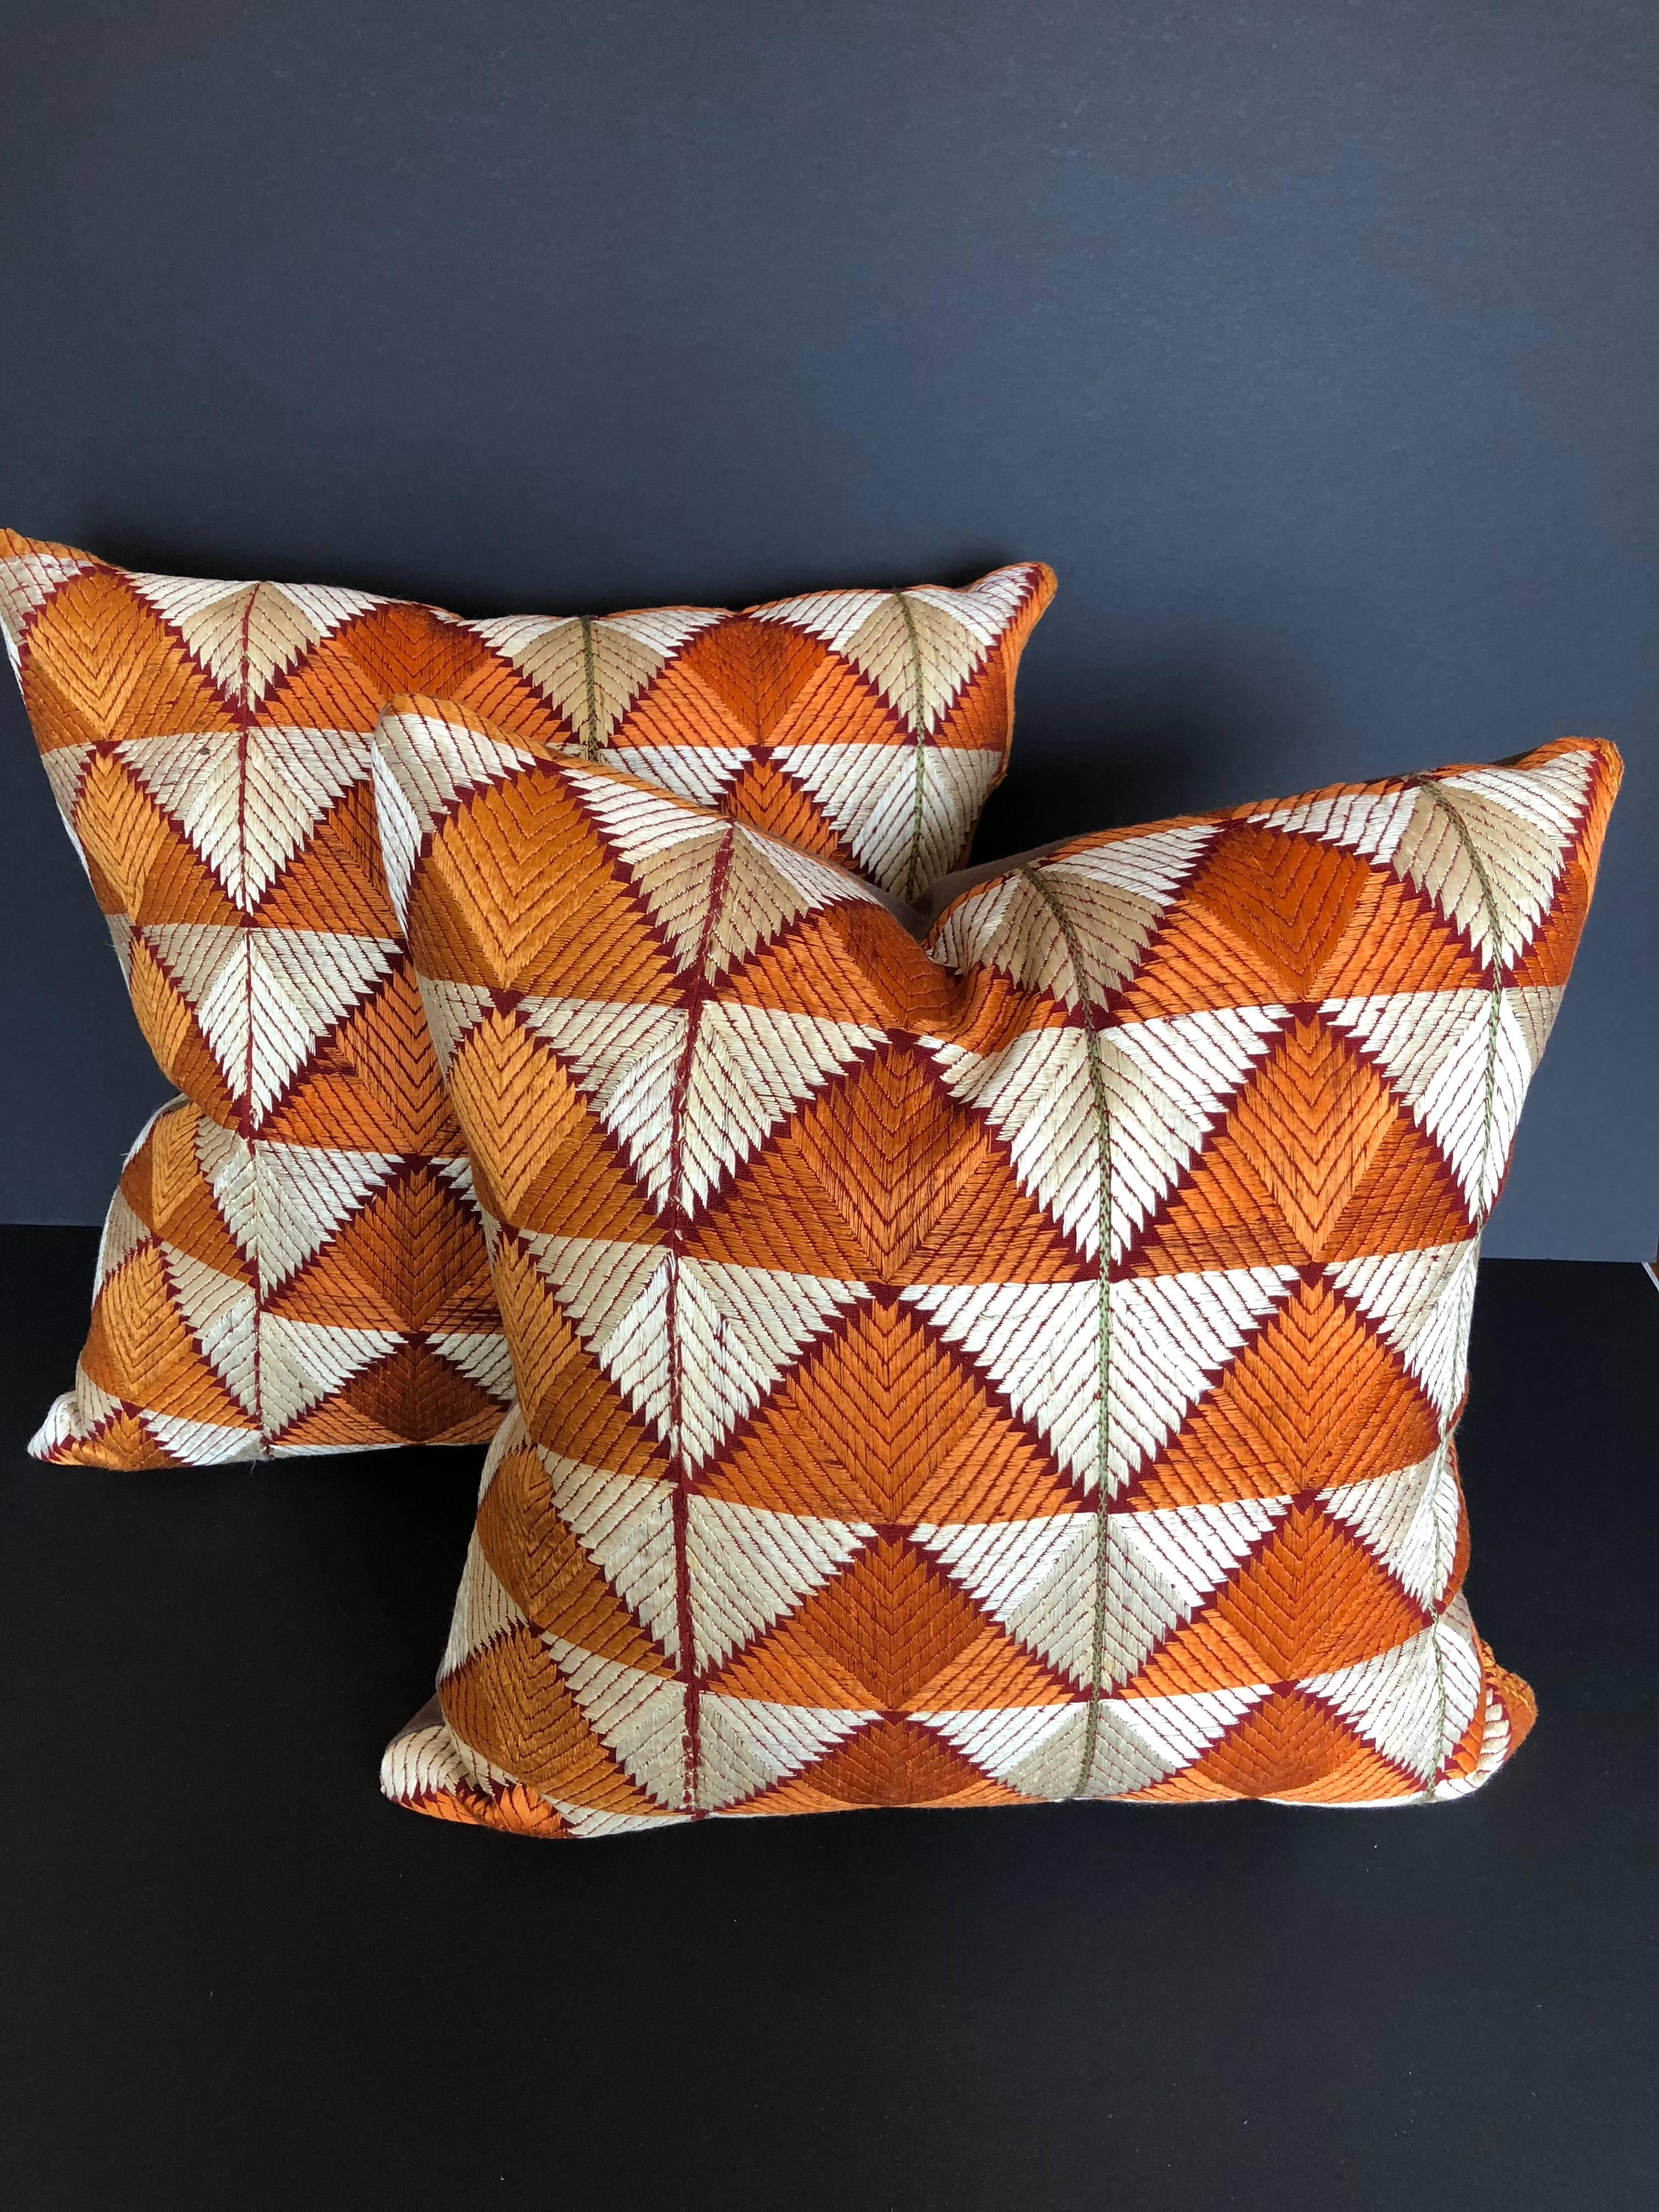 Pillows cut from a vintage silk Phulkari Bagh wedding shawl from Punjab, India. Hand-loomed cotton khadi cloth is hand embroidered with vibrant silk threads. The shawl is made by relatives of the young bride for her wedding and other important